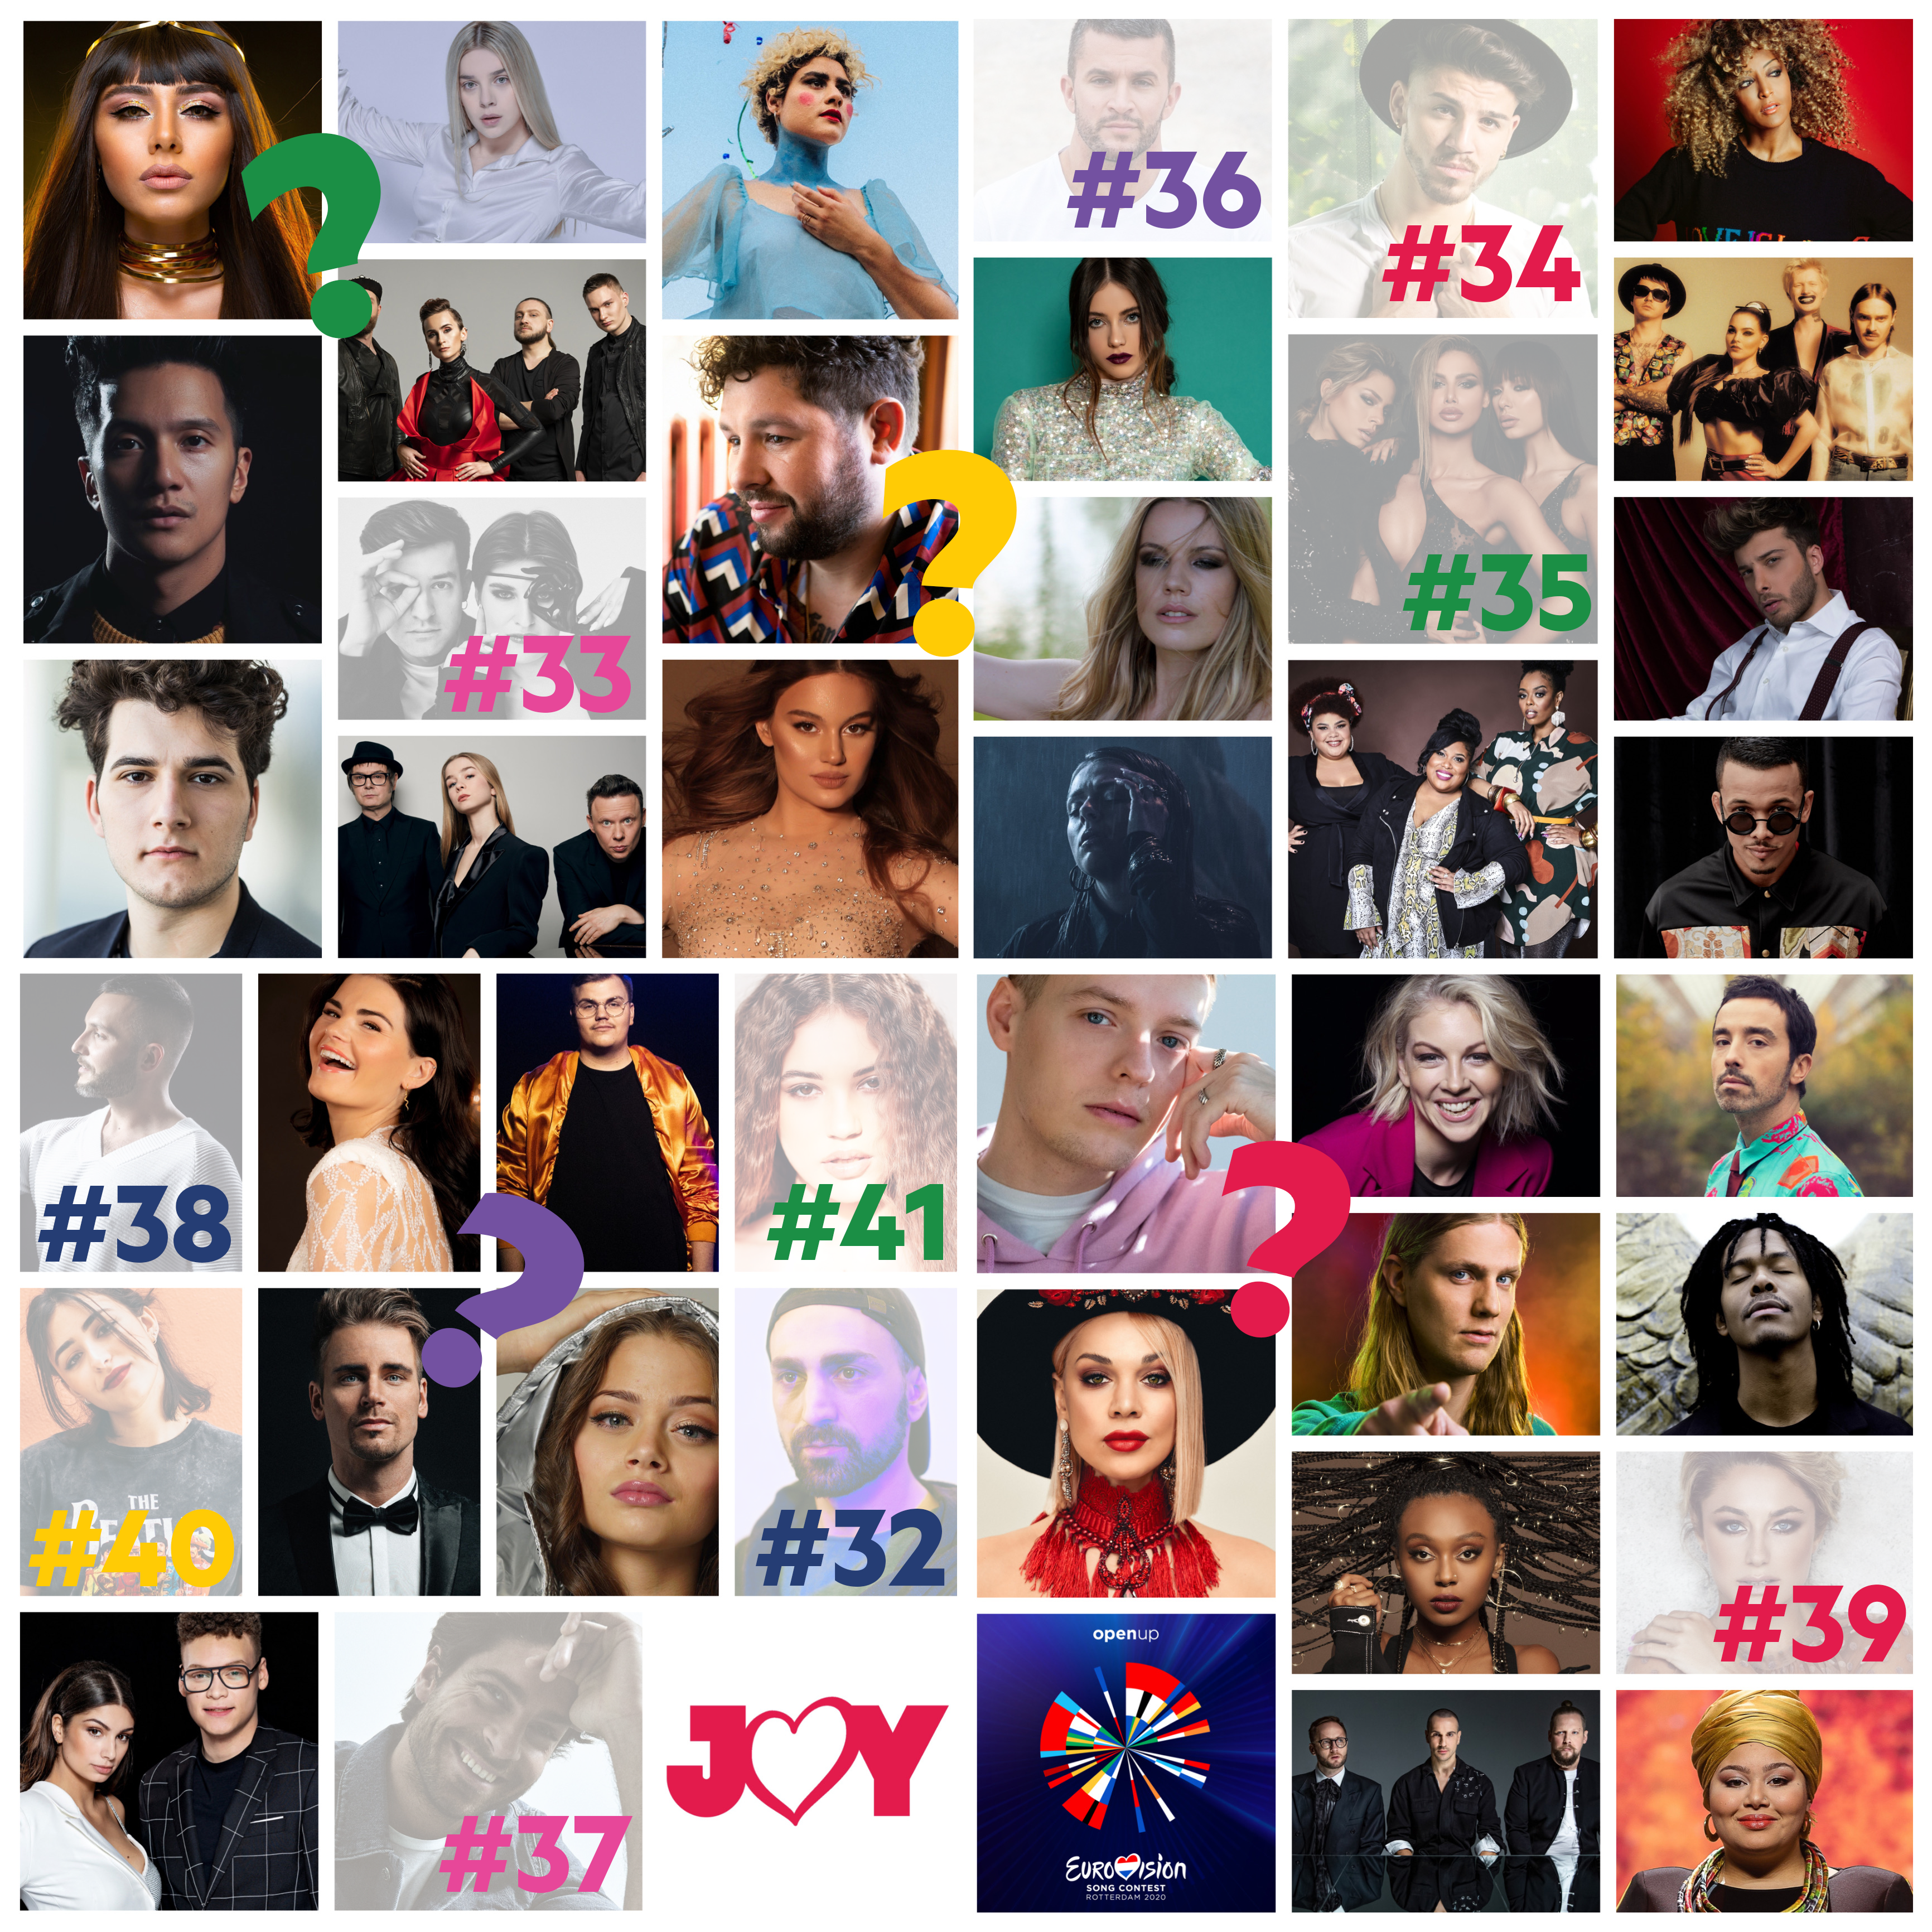 Your votes, your 2020 Eurovision preview show: #31 to #22